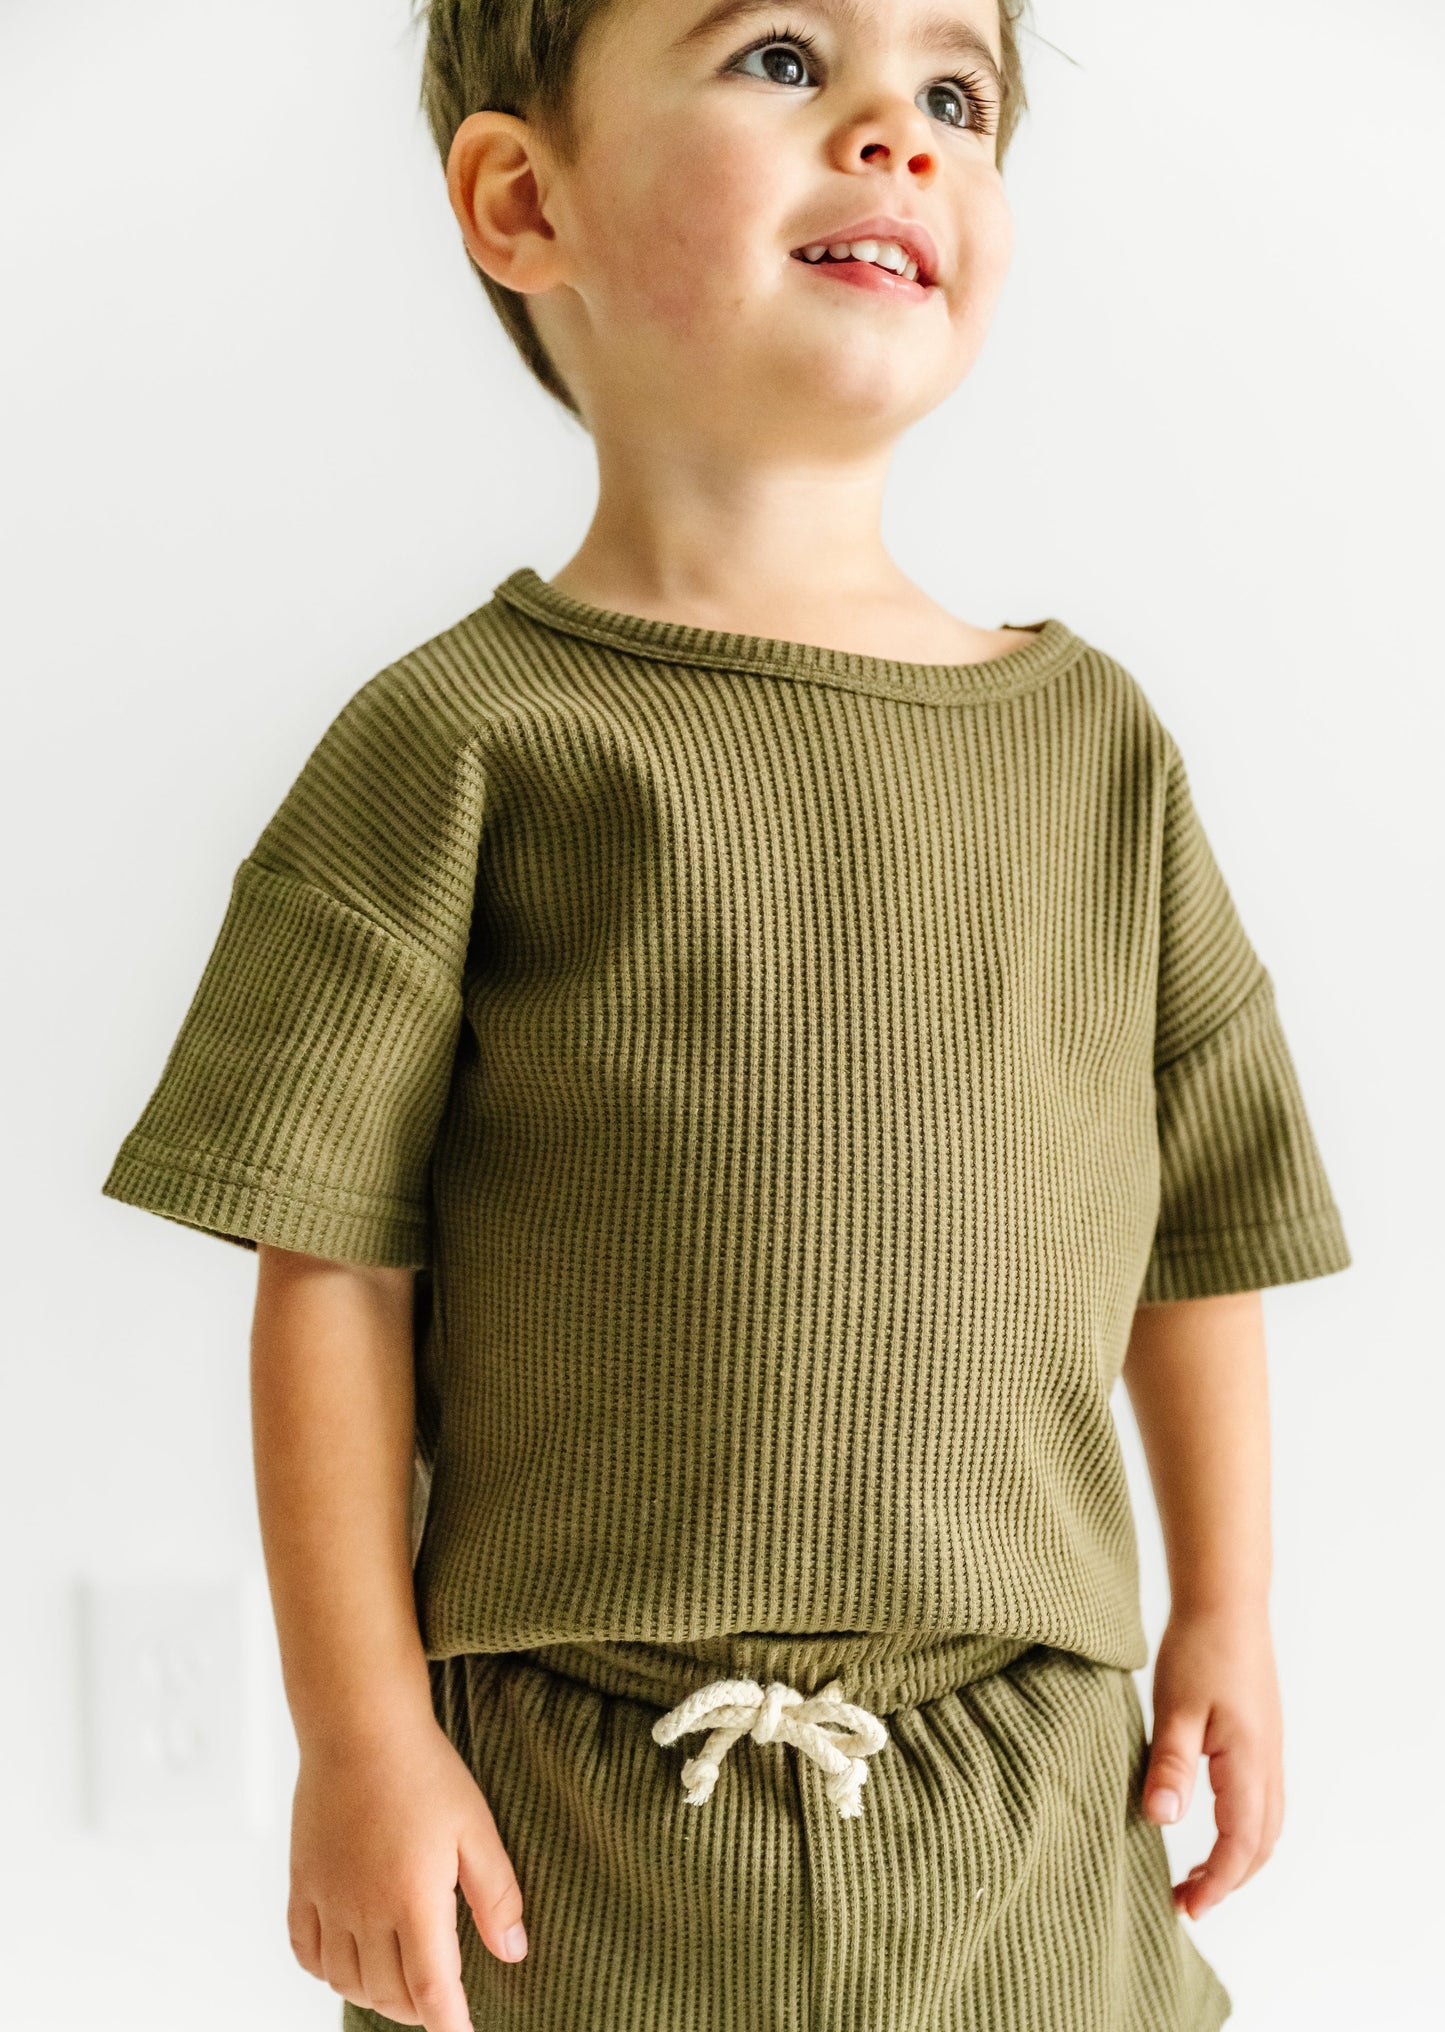 WAFFLE SHORTIE SET IN OLIVE